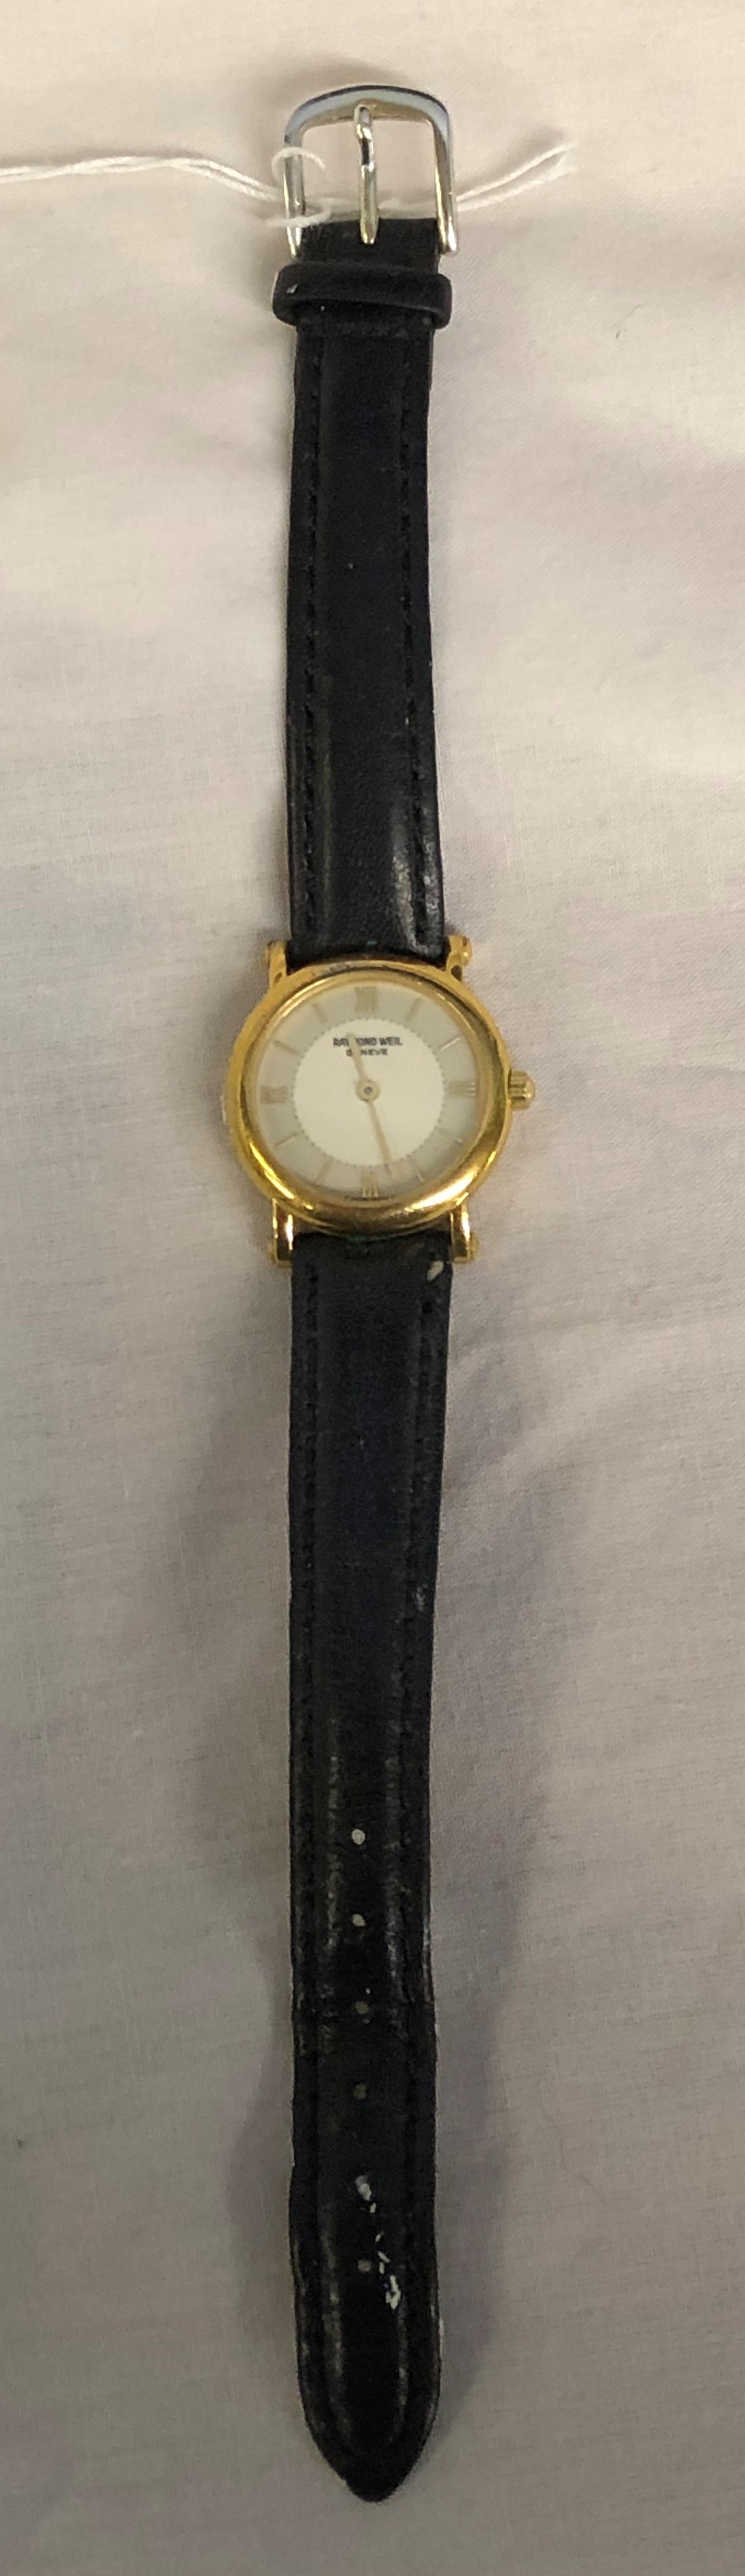 RAYMOND WEIL LADIES WRIST WATCH ON LEATHER STRAP - Image 2 of 4